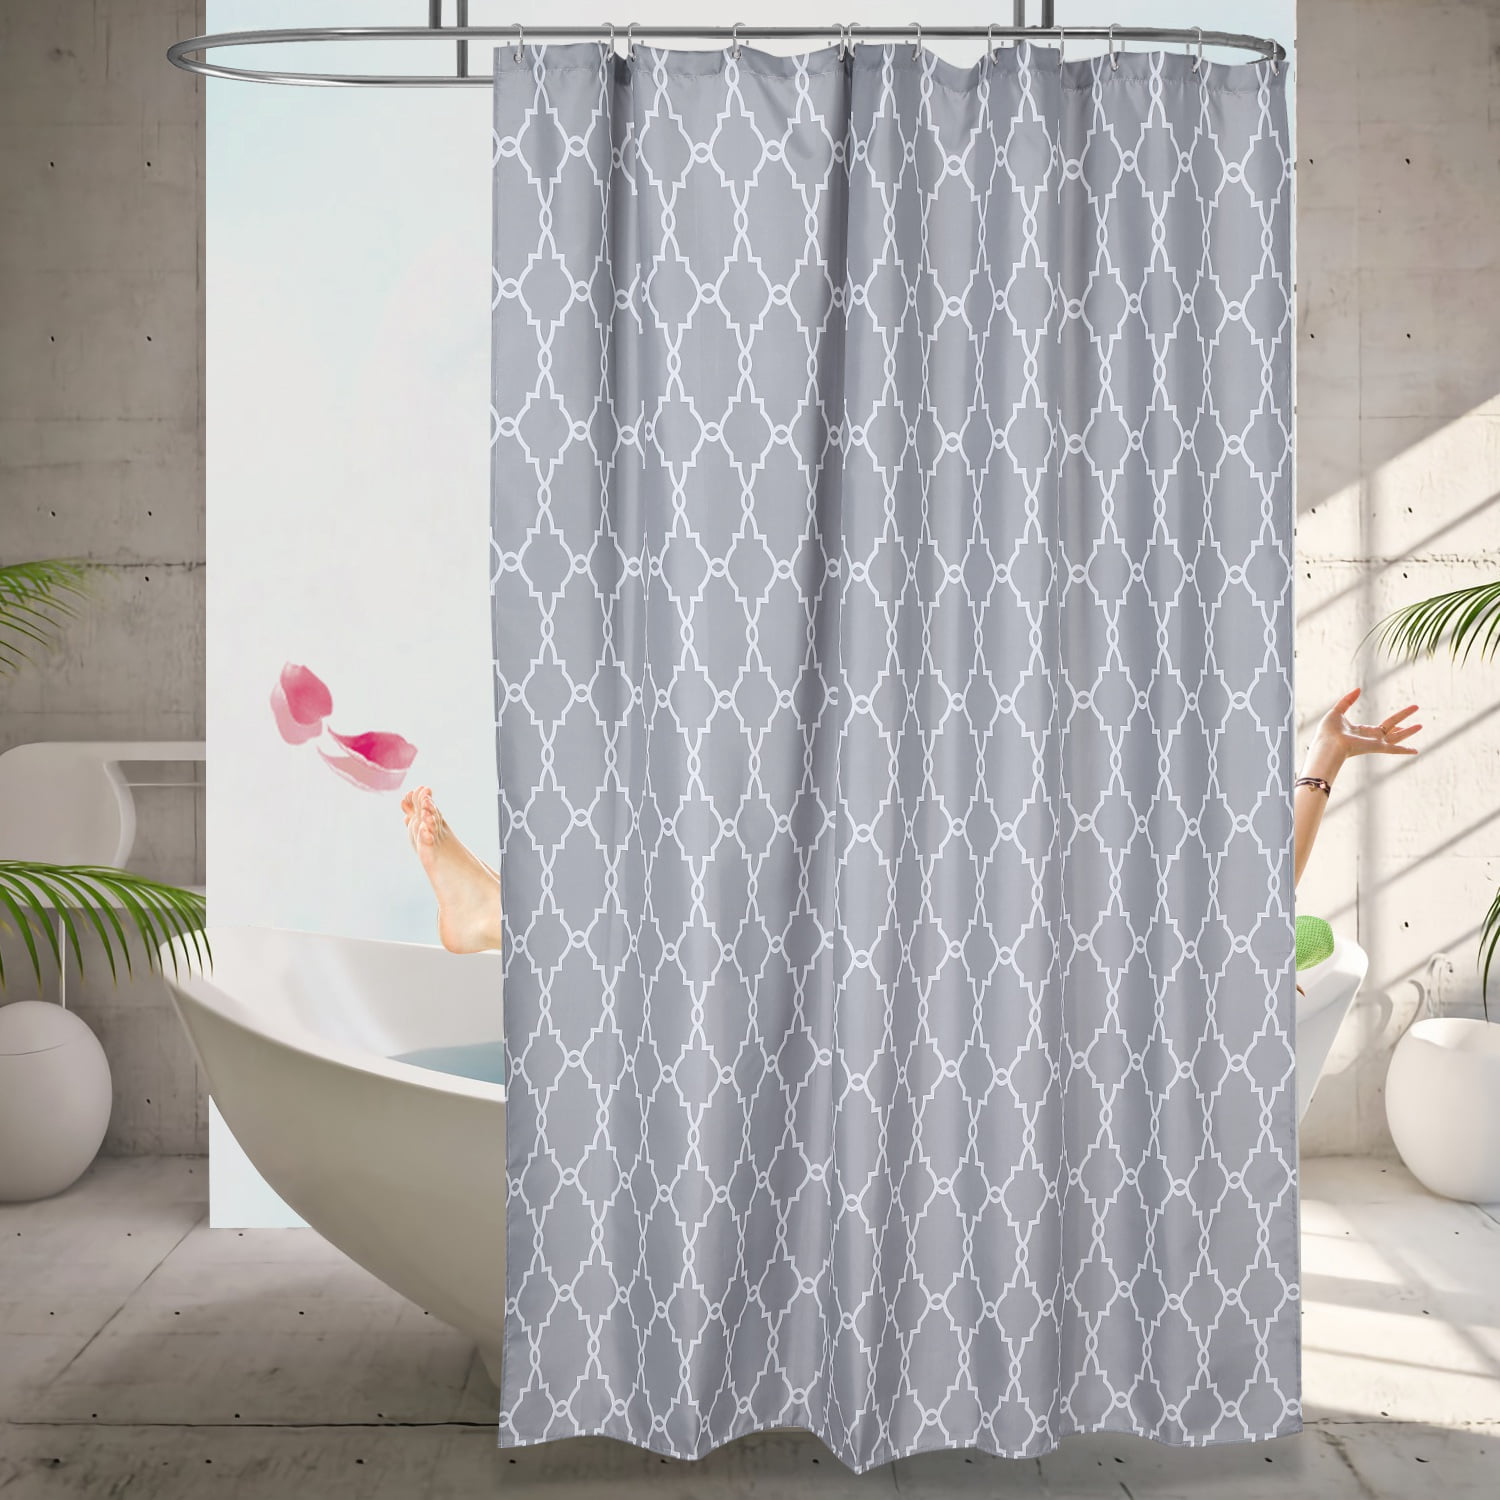 Navy Blue Bathroom PEVA Shower Curtain Bathtub Bubbles Relax with matching Towel 